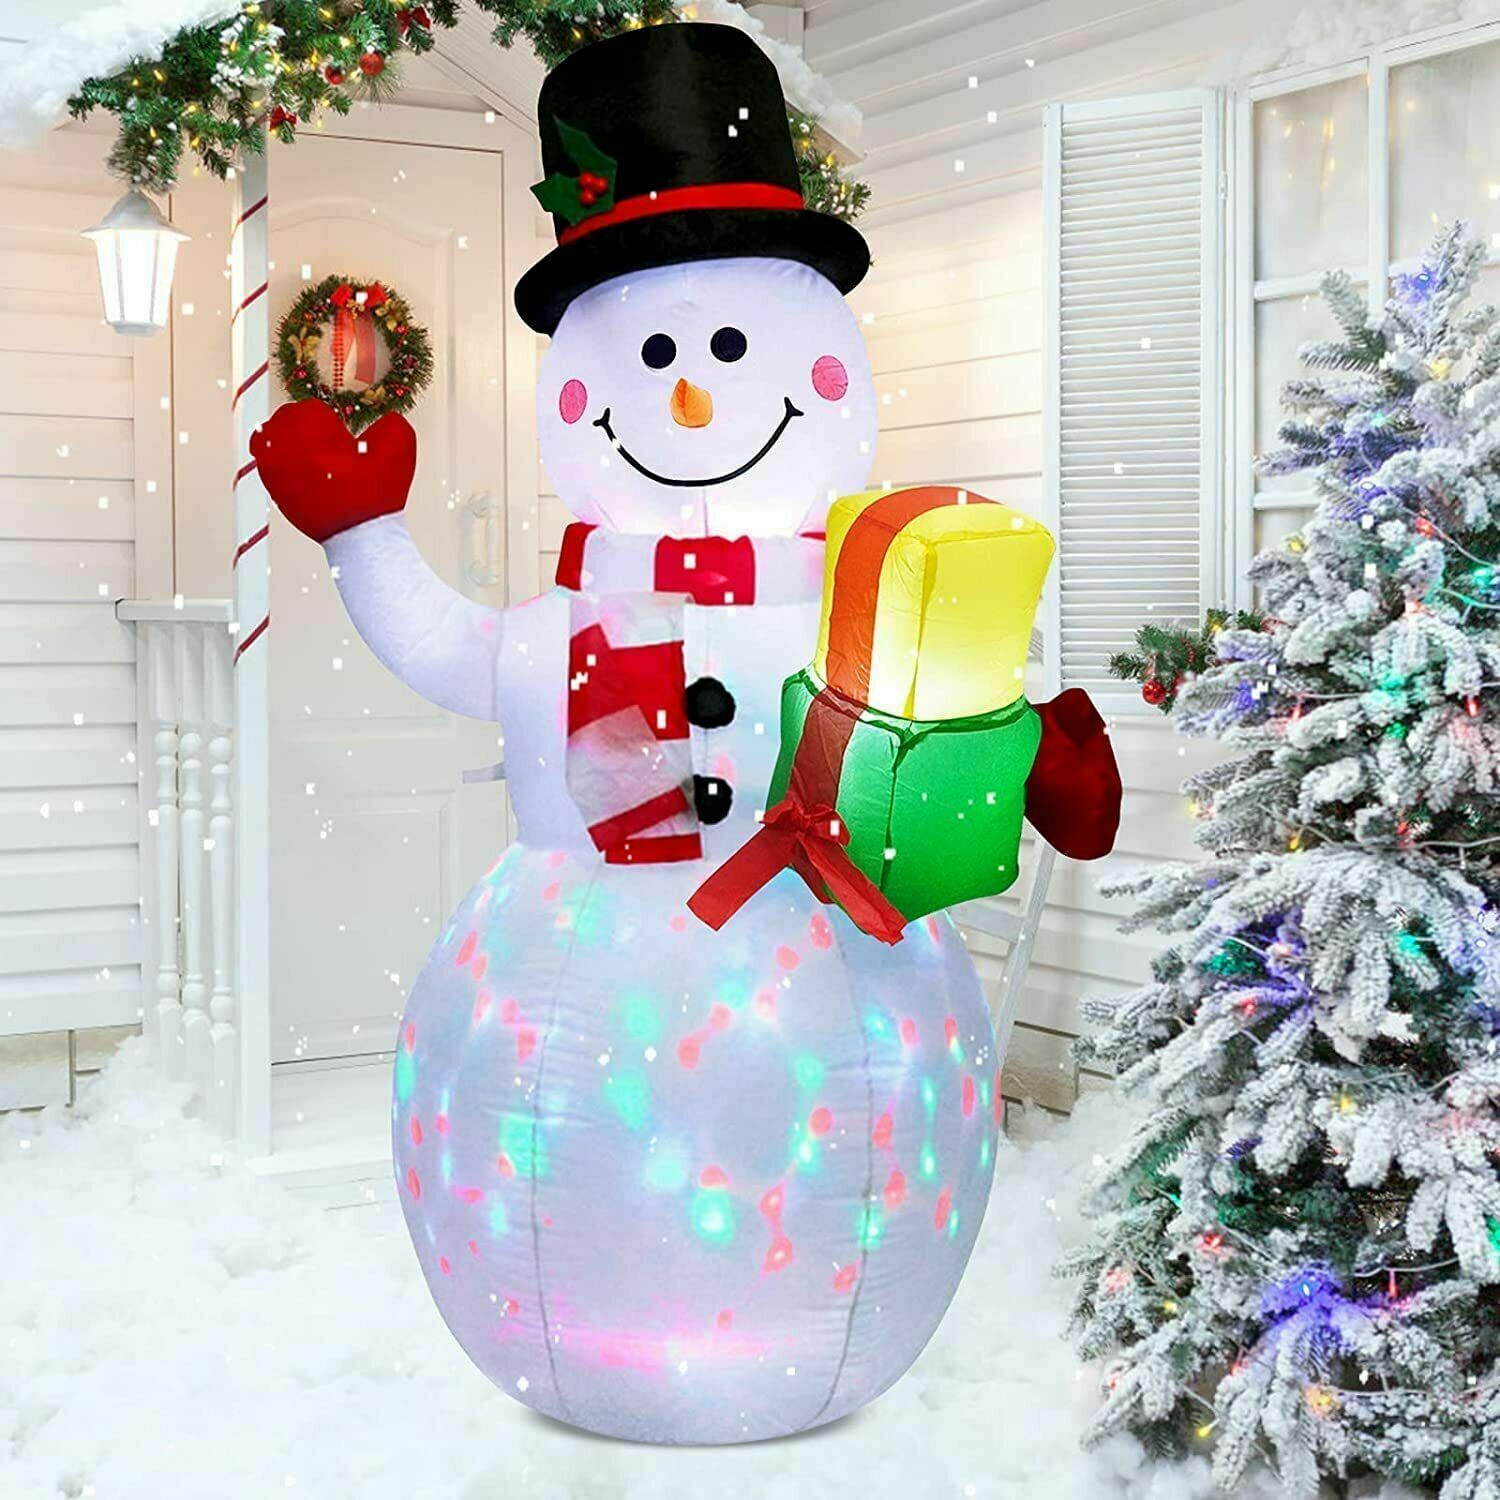 5ft Christmas Inflatables Snowman Outdoor Yard Decor with Rotating LED Lights Christmas Blow Up Decoration Garden - image 1 of 9